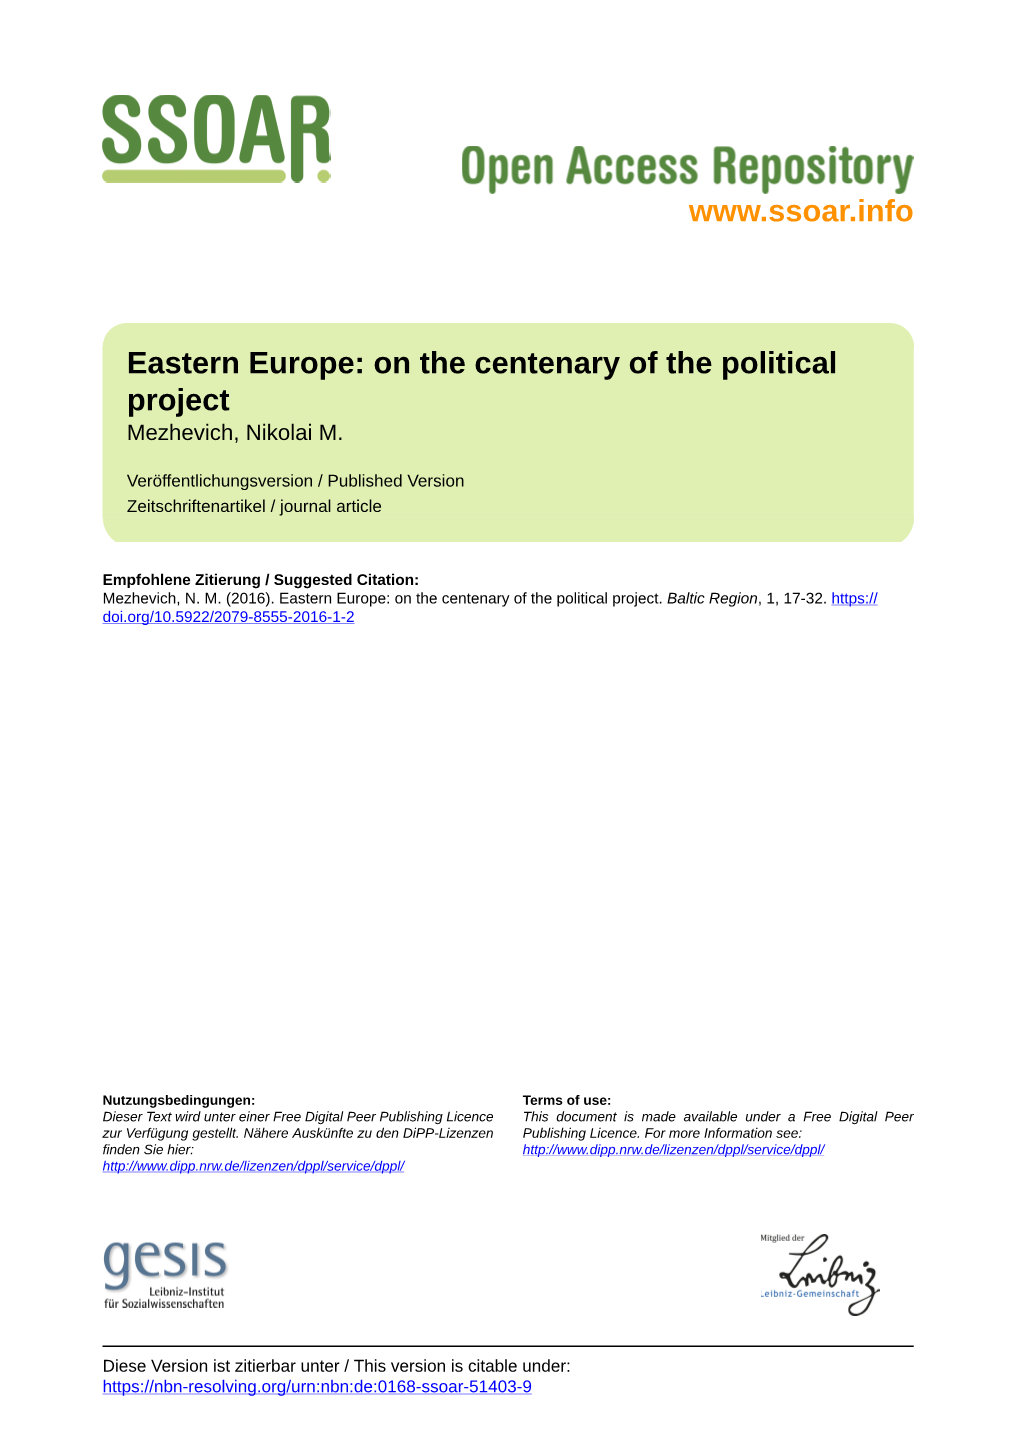 Eastern Europe: on the Centenary of the Political Project Mezhevich, Nikolai M